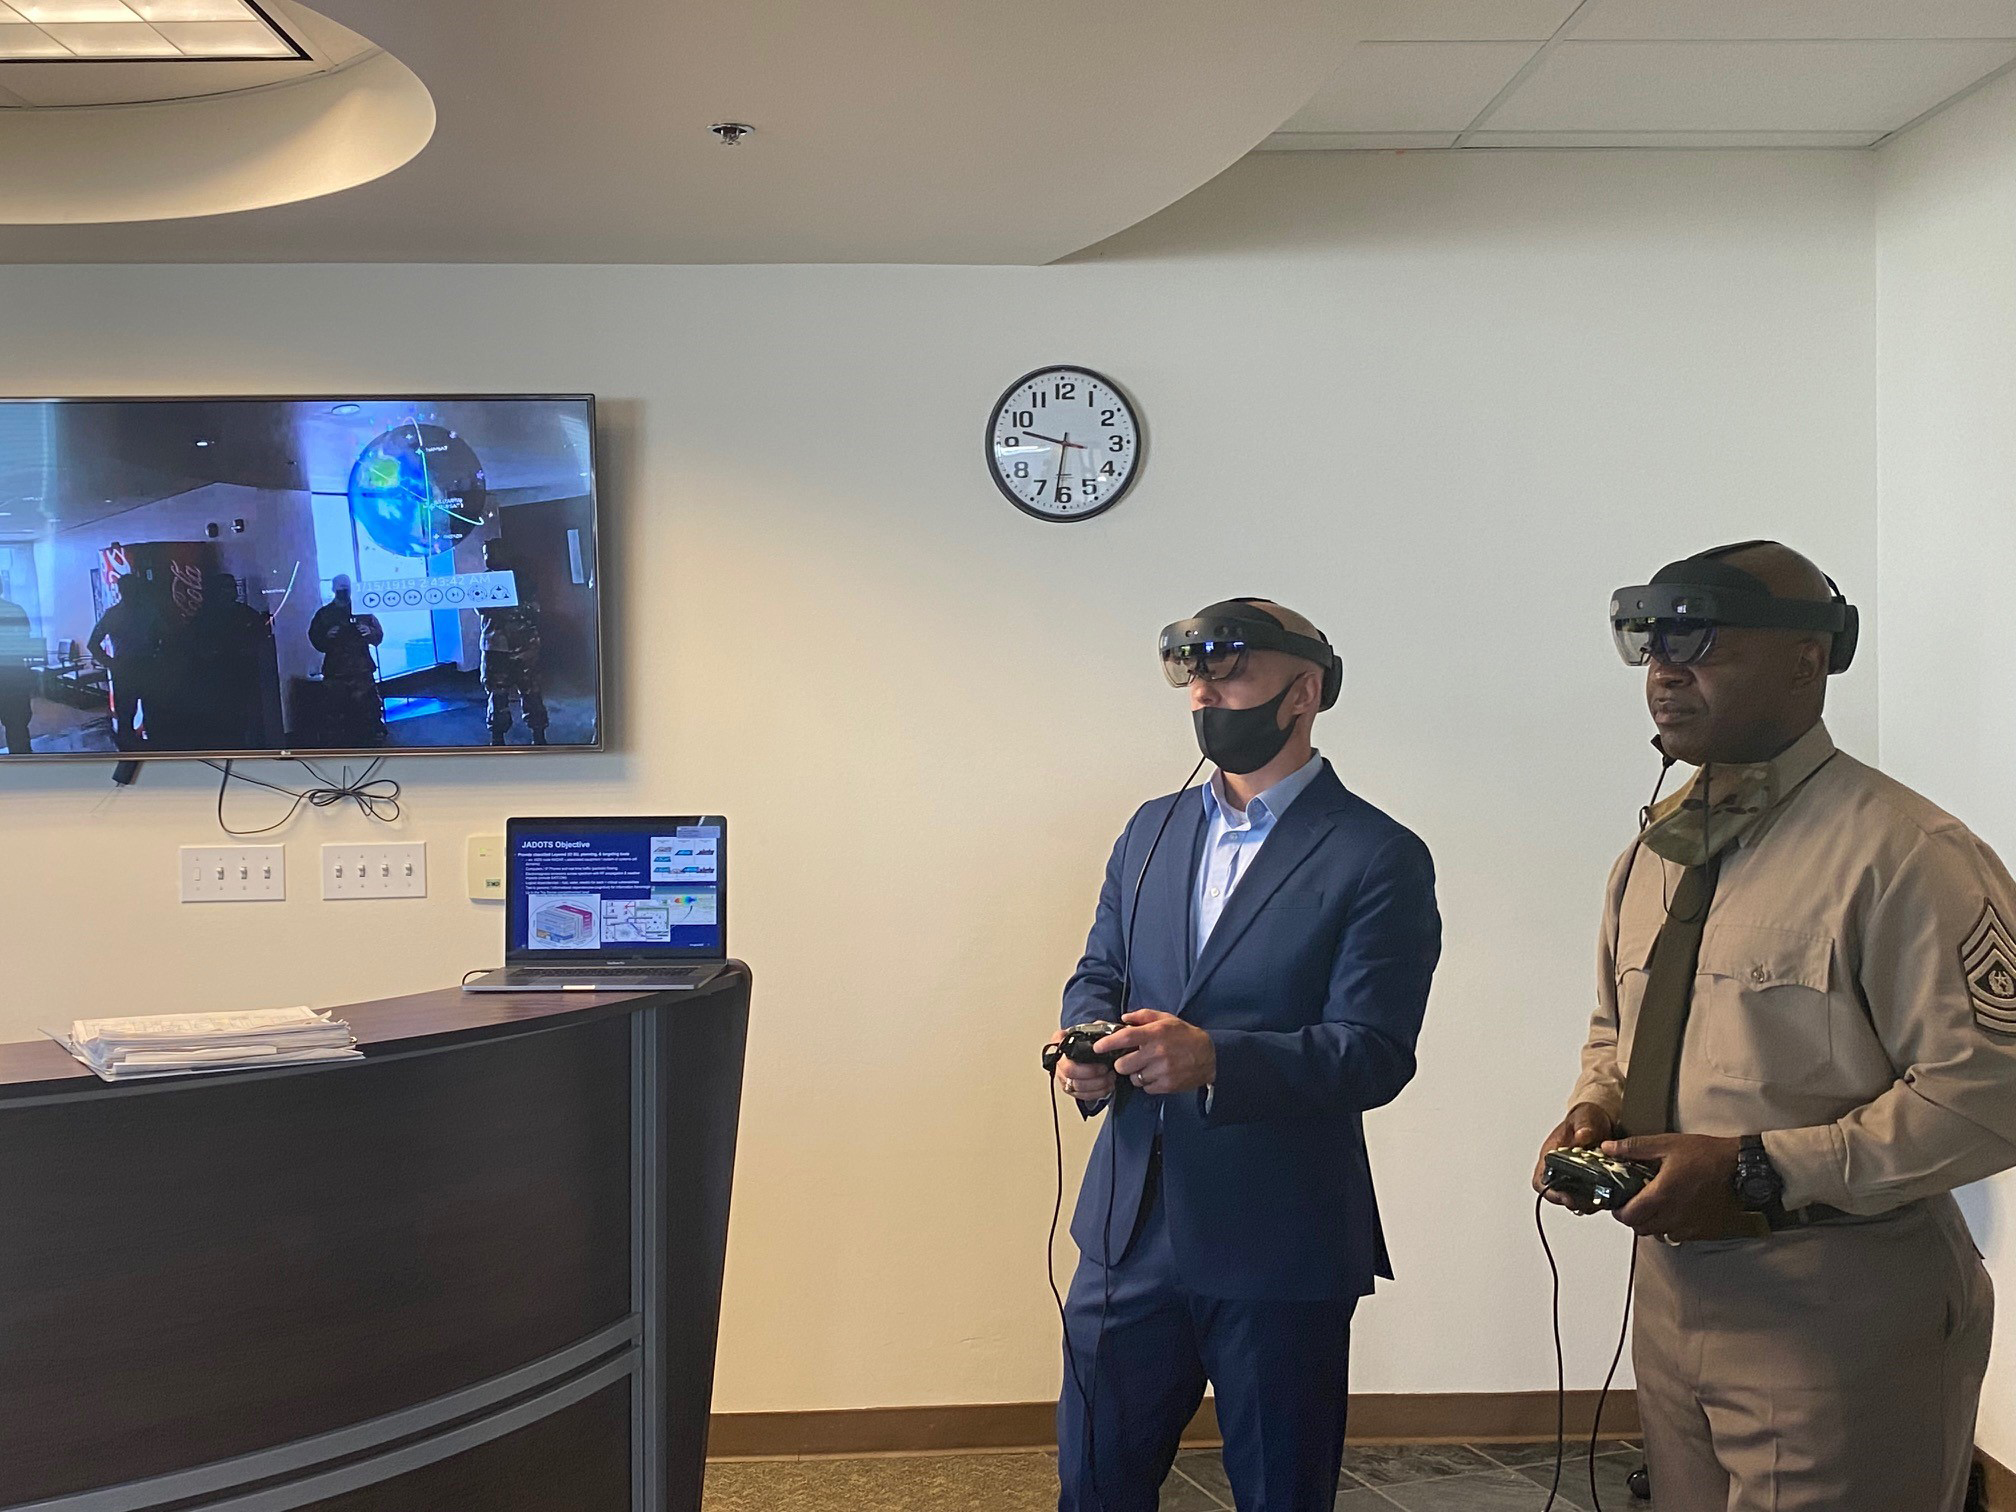 Lt. Col. Joe Mroszczyk (left) and Army Space and Missile Defense Command (SMDC) Command Sgt. Maj. Finis Dodson demonstrate an APL-developed augmented-reality, 3D-visualization capability